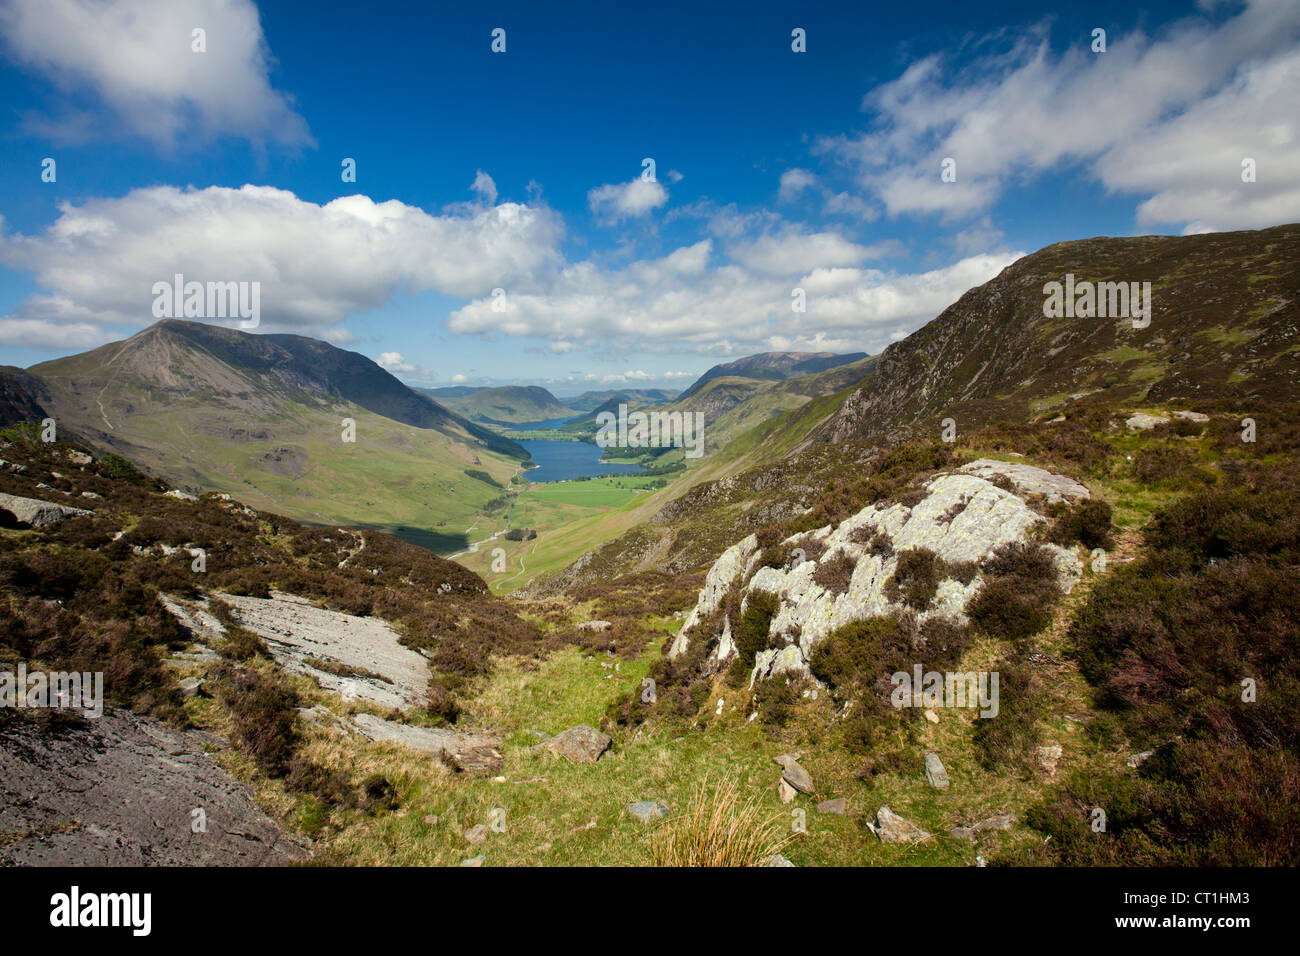 Buttermere Lake And Crummock Water With Red Pike Mountain, The Lake District Cumbria Lakeland England United Kingdom Stock Photo